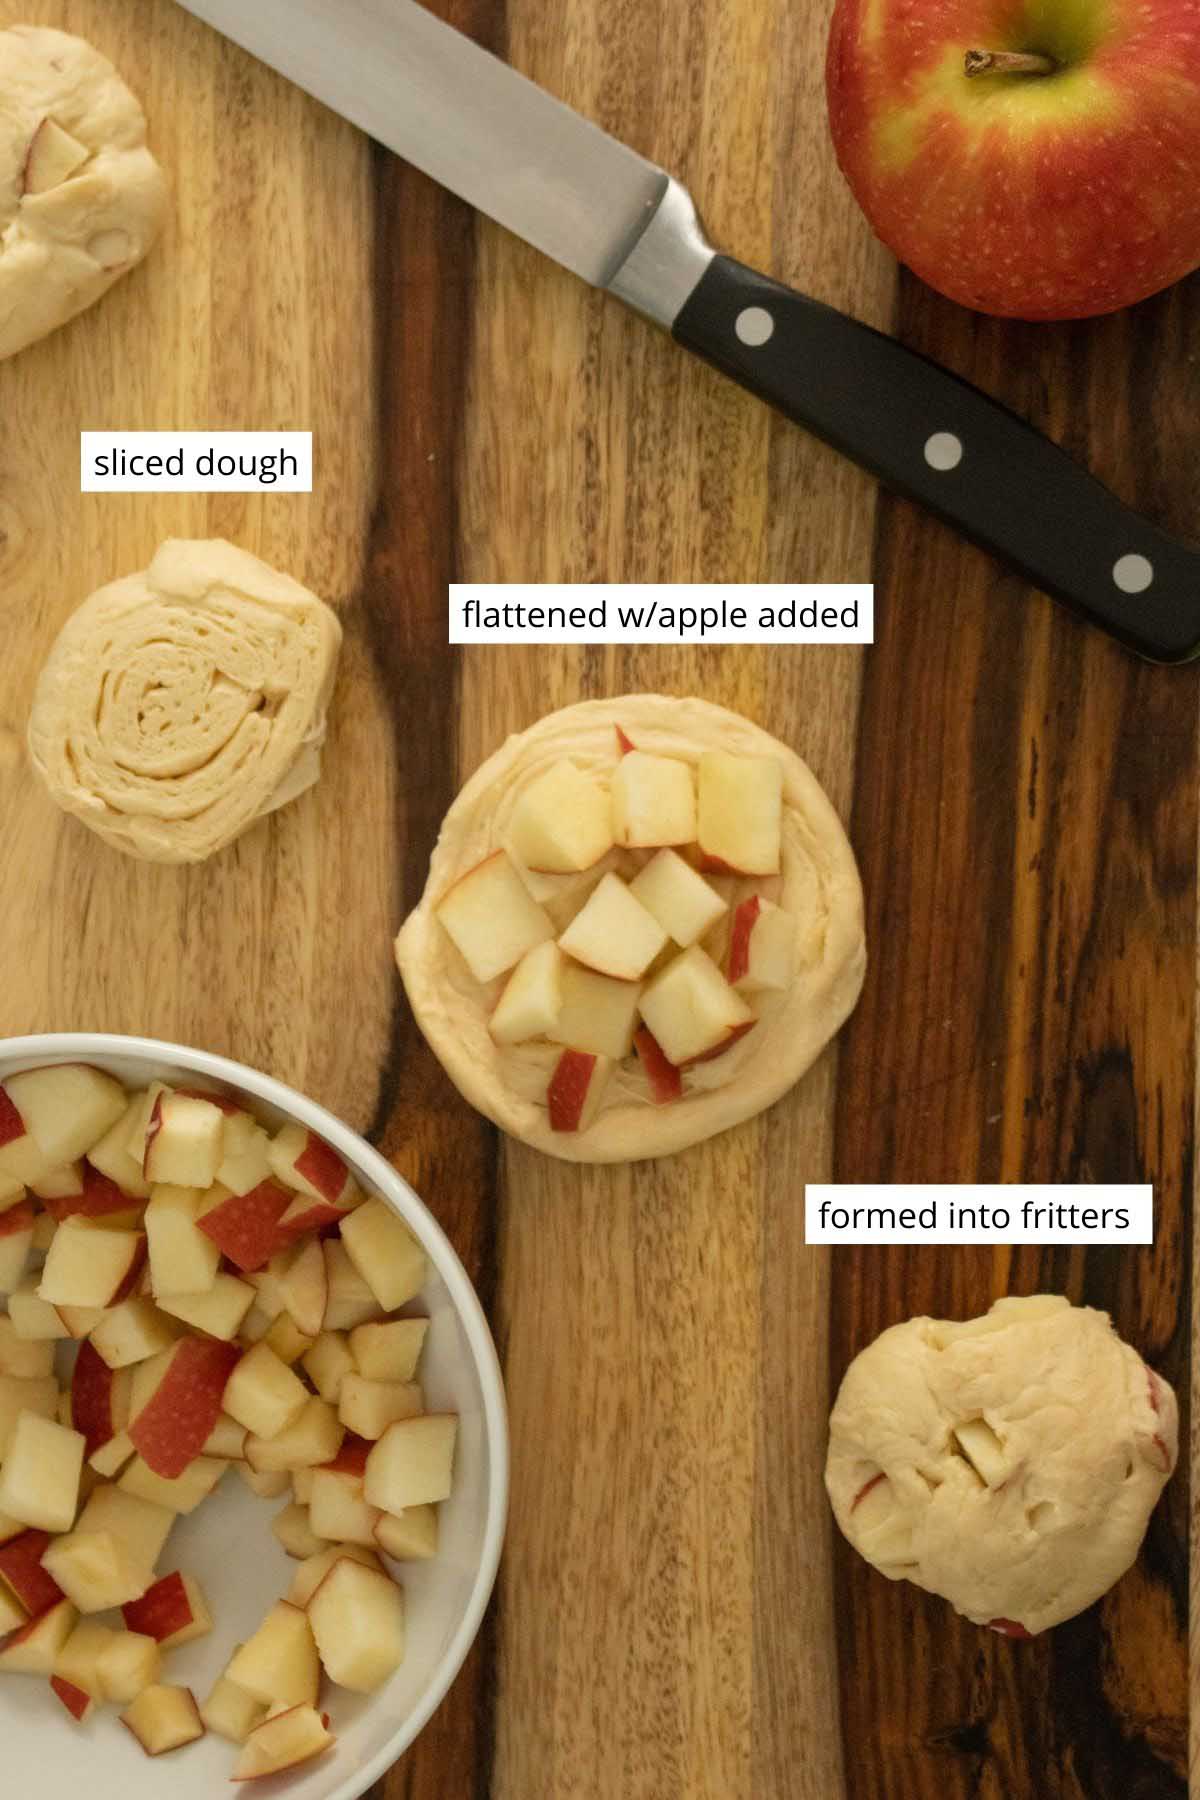 photo of a dough slice, one flattened with apple pieces, and one fritter after working the apple into the dough. Text labeling each one